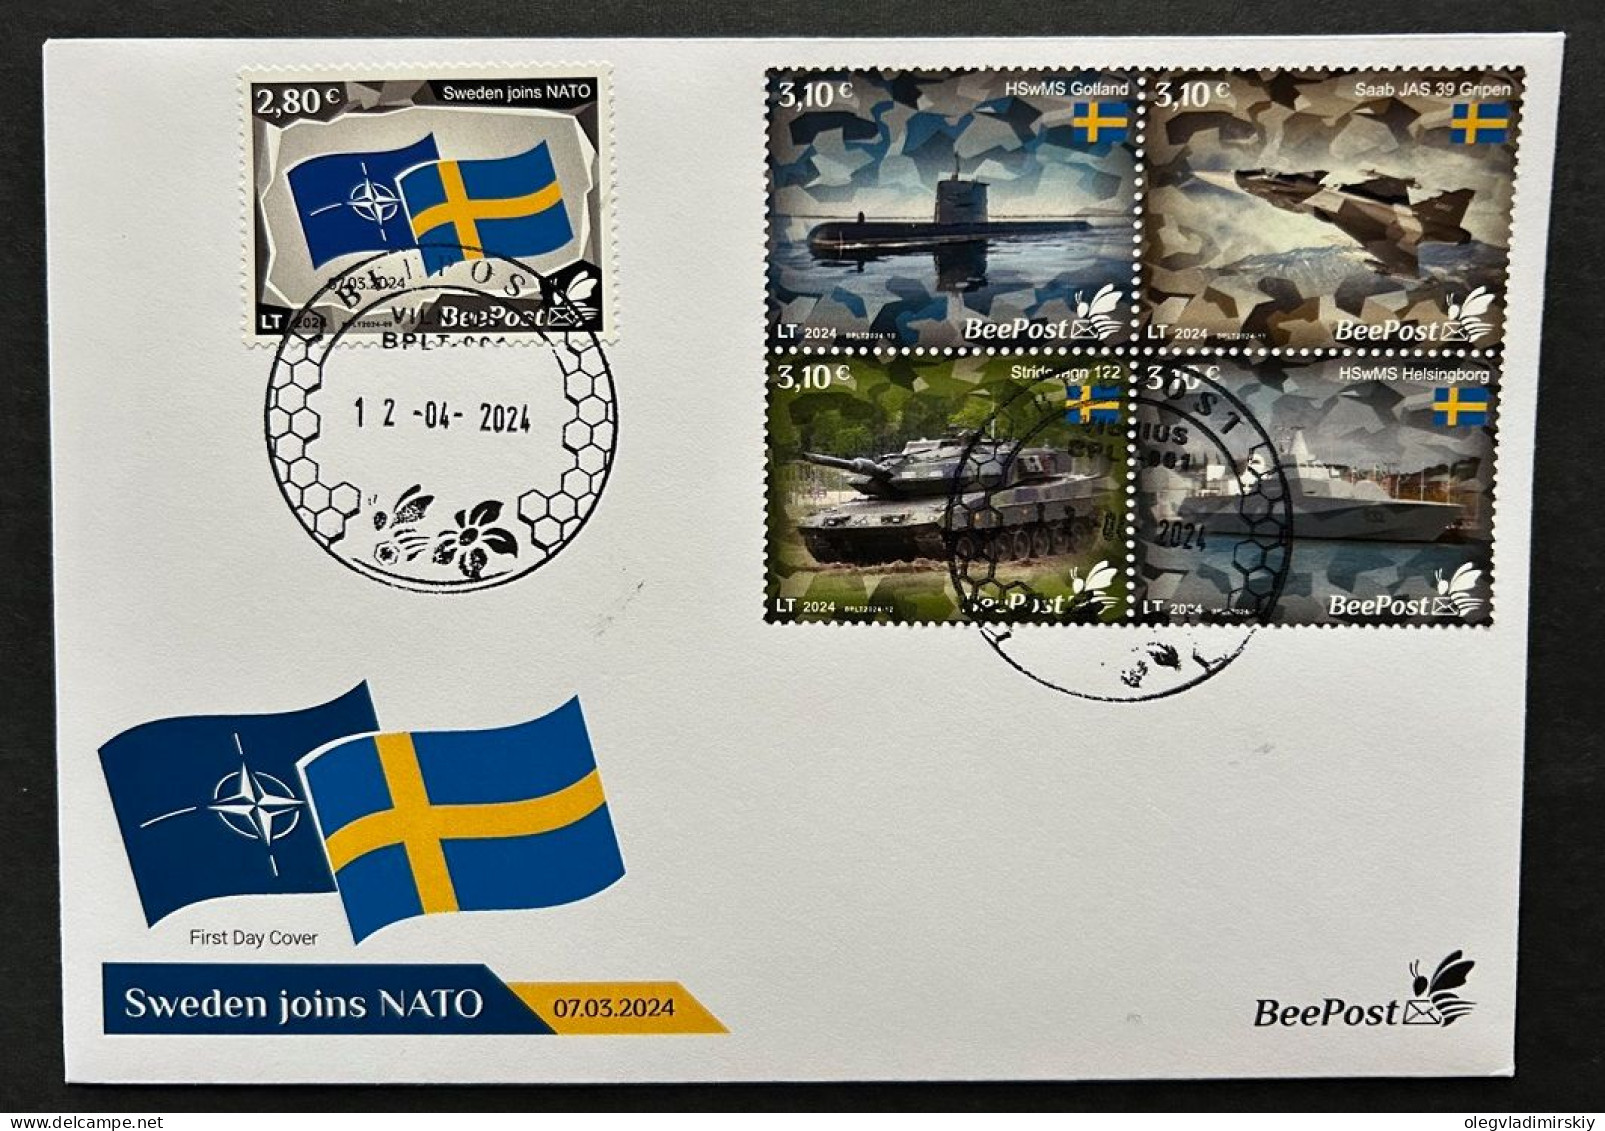 Lithuania 2024 Baltic - NATO Sea Sweden Joins NATO Tank Submarine Warship Airplane Flags BeePost Set Of 5 Stamps FDC - Militares